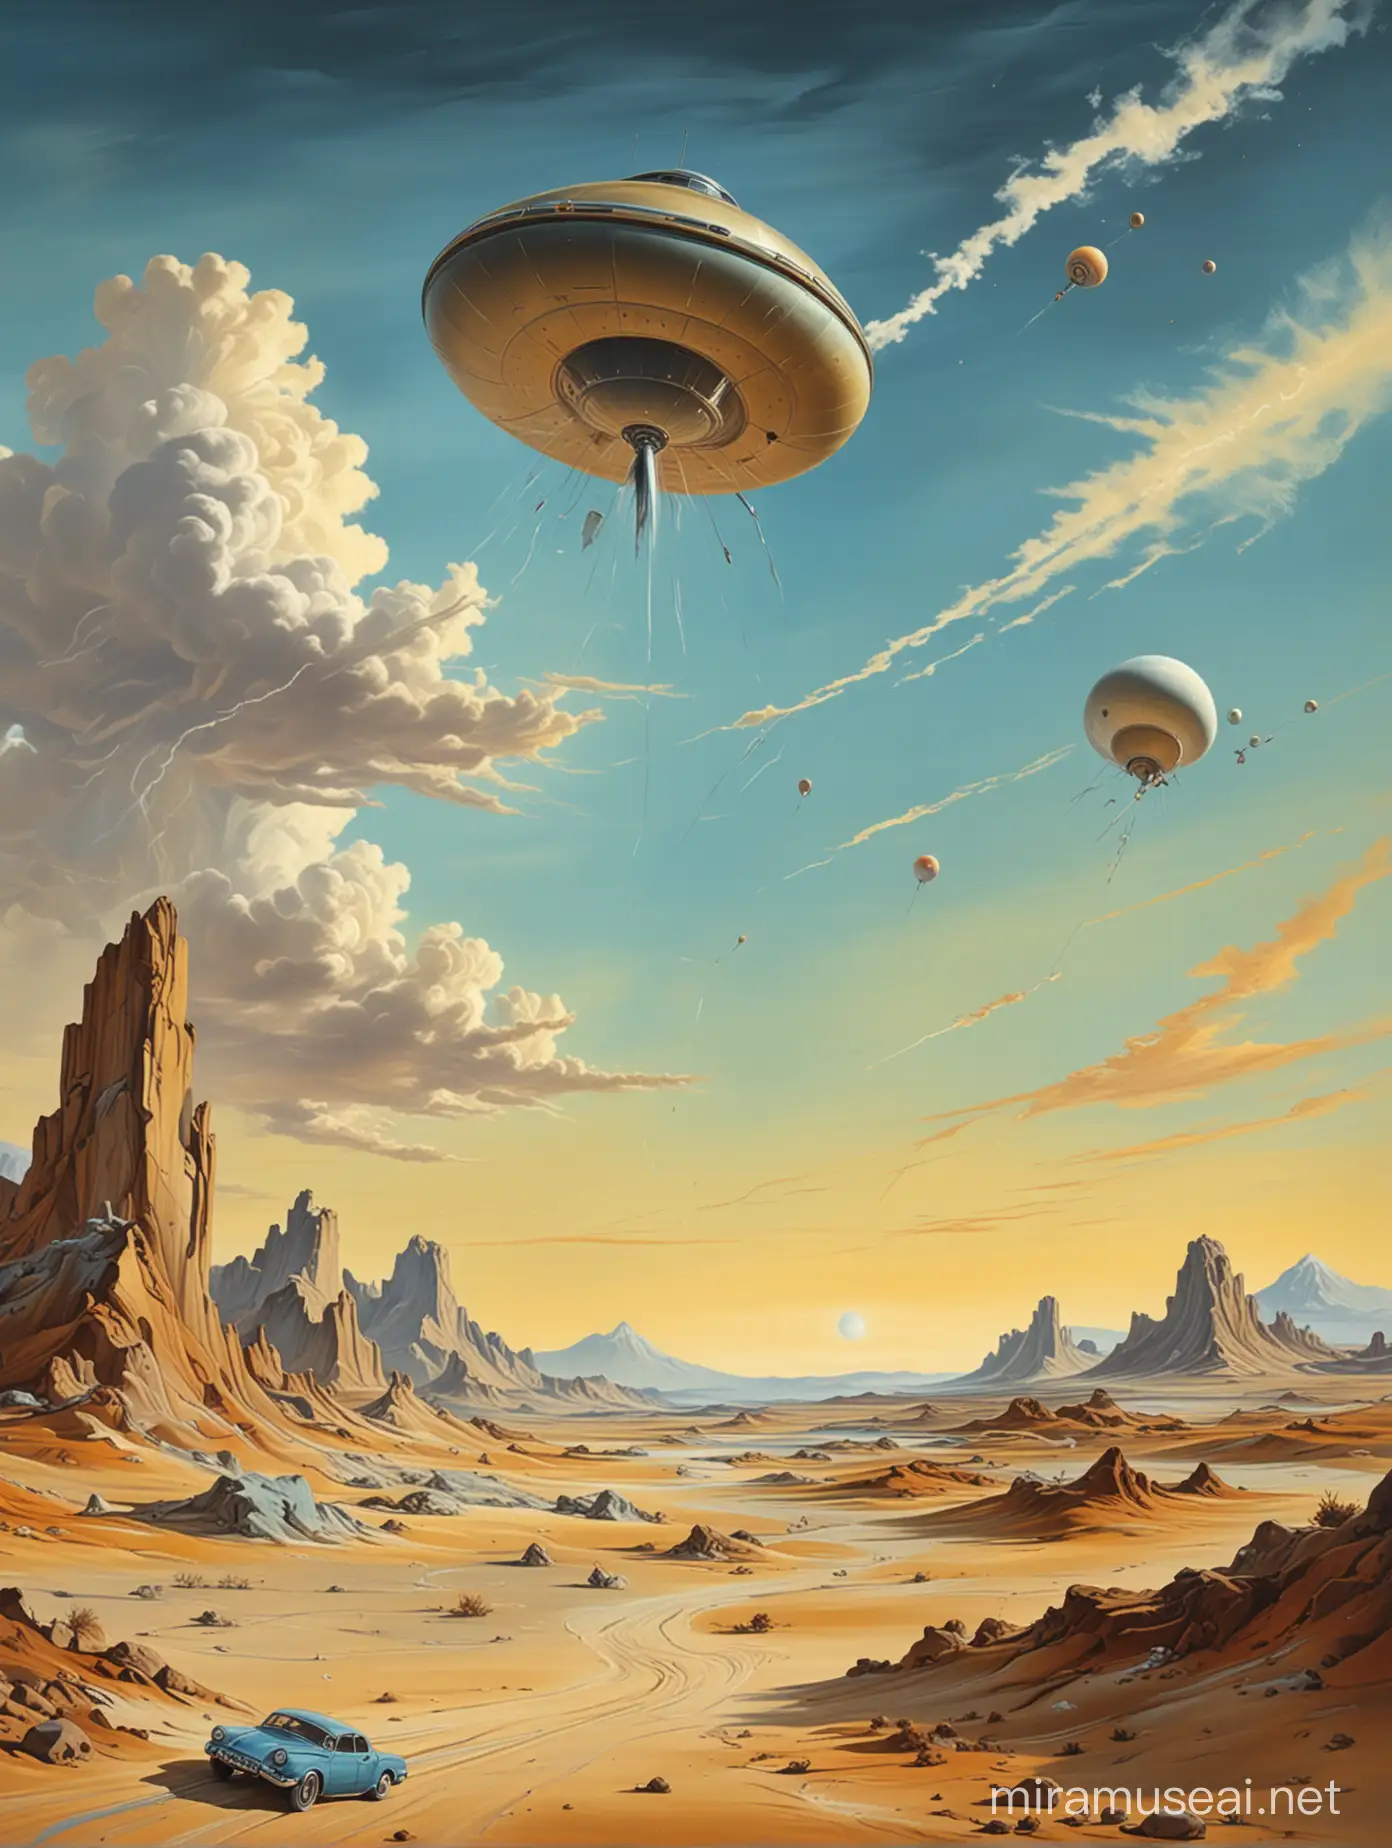 Highly detailed painting closely based on ((("The Persistence of Memory" by Salvador Dali))), wide view,rocket contrails and a flying saucer in the sky, use muted pastel colors only, high quality